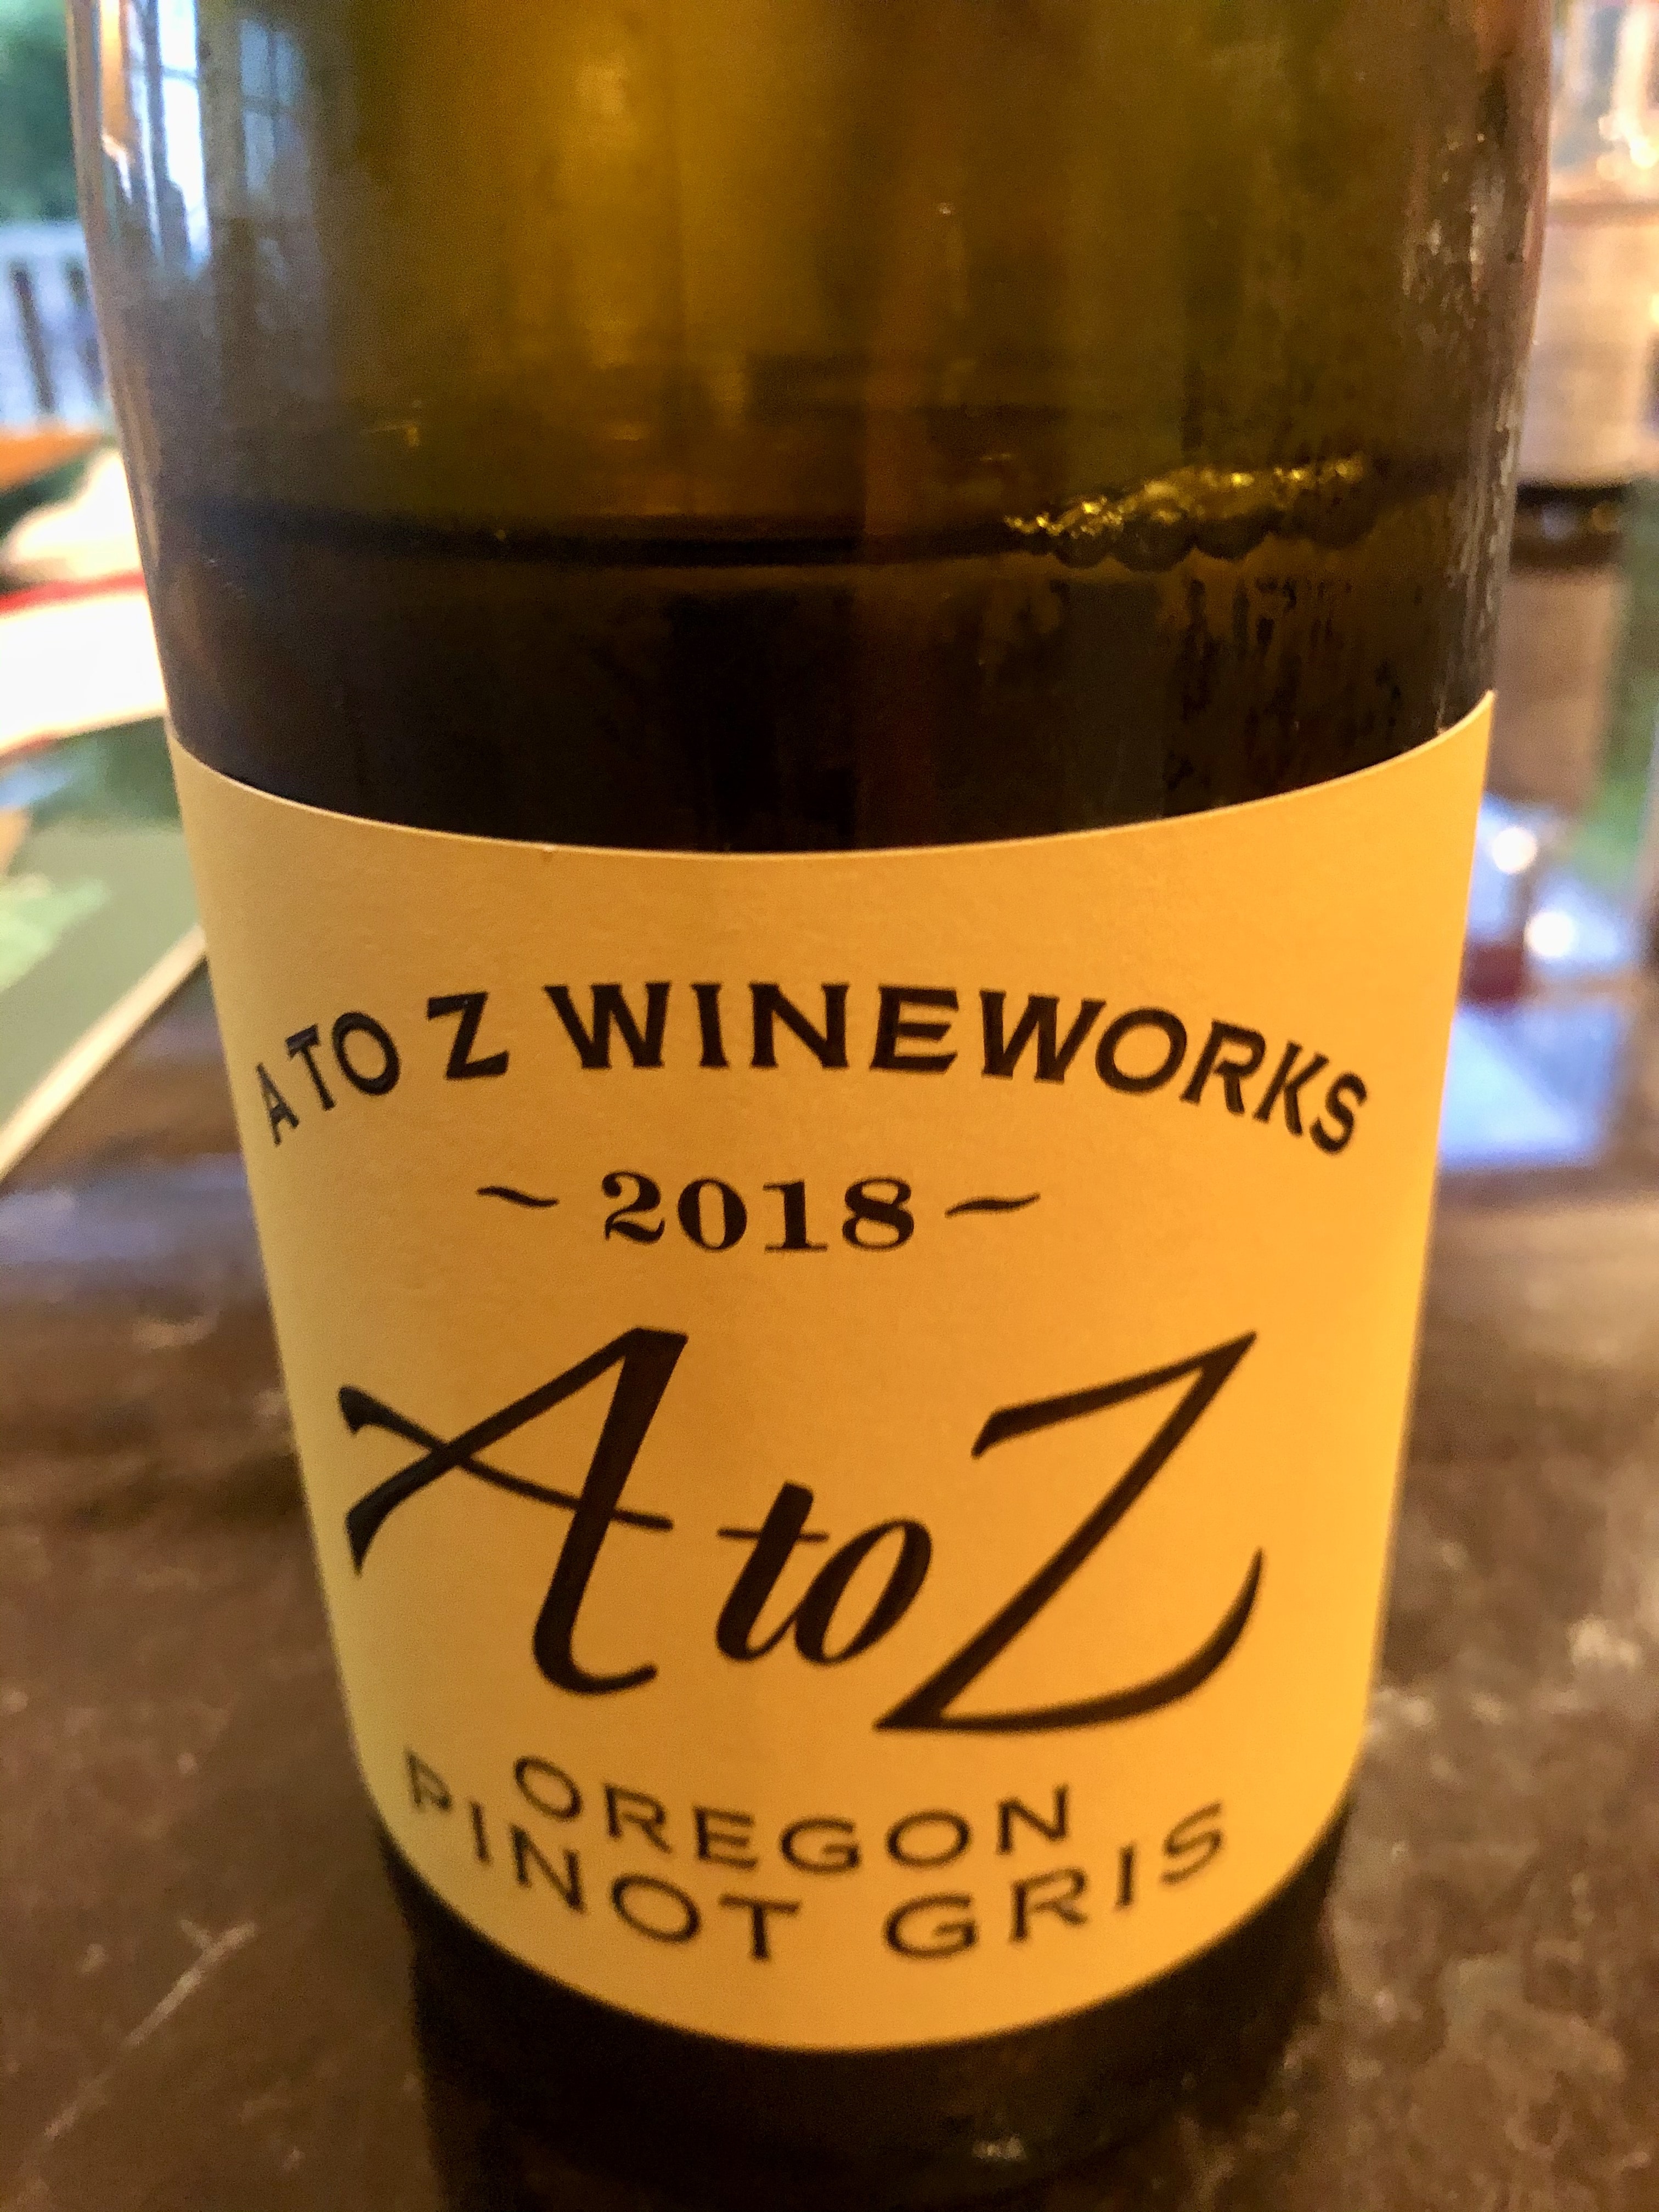 A to Z Pinot Gris